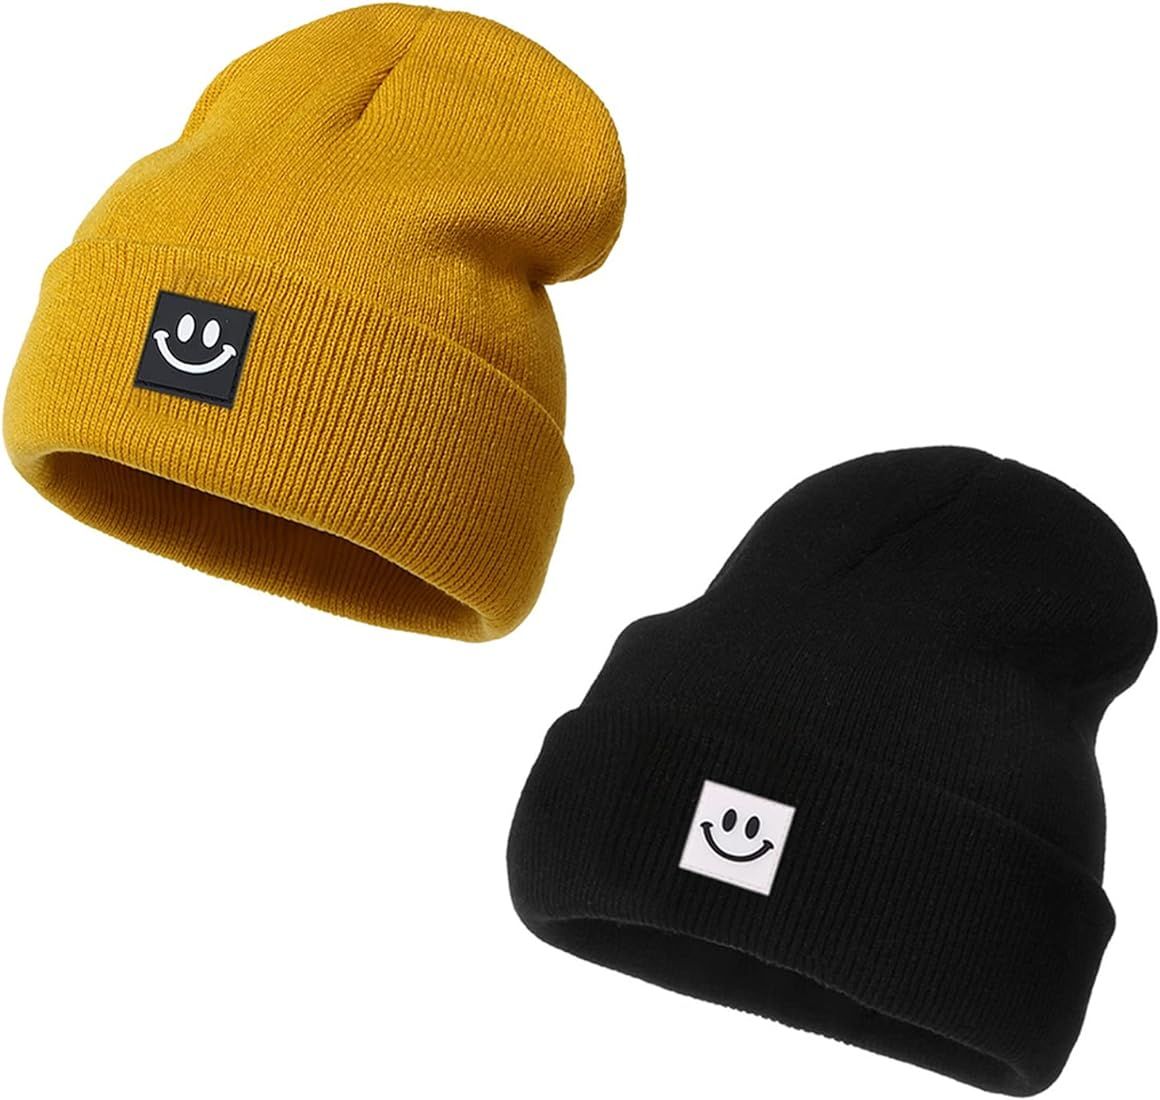 Sinsinfuns Knit Beanie Hats for Men Women Smiley Face Embroidered Soft Winter Hats Y2k Beanies | Amazon (US)